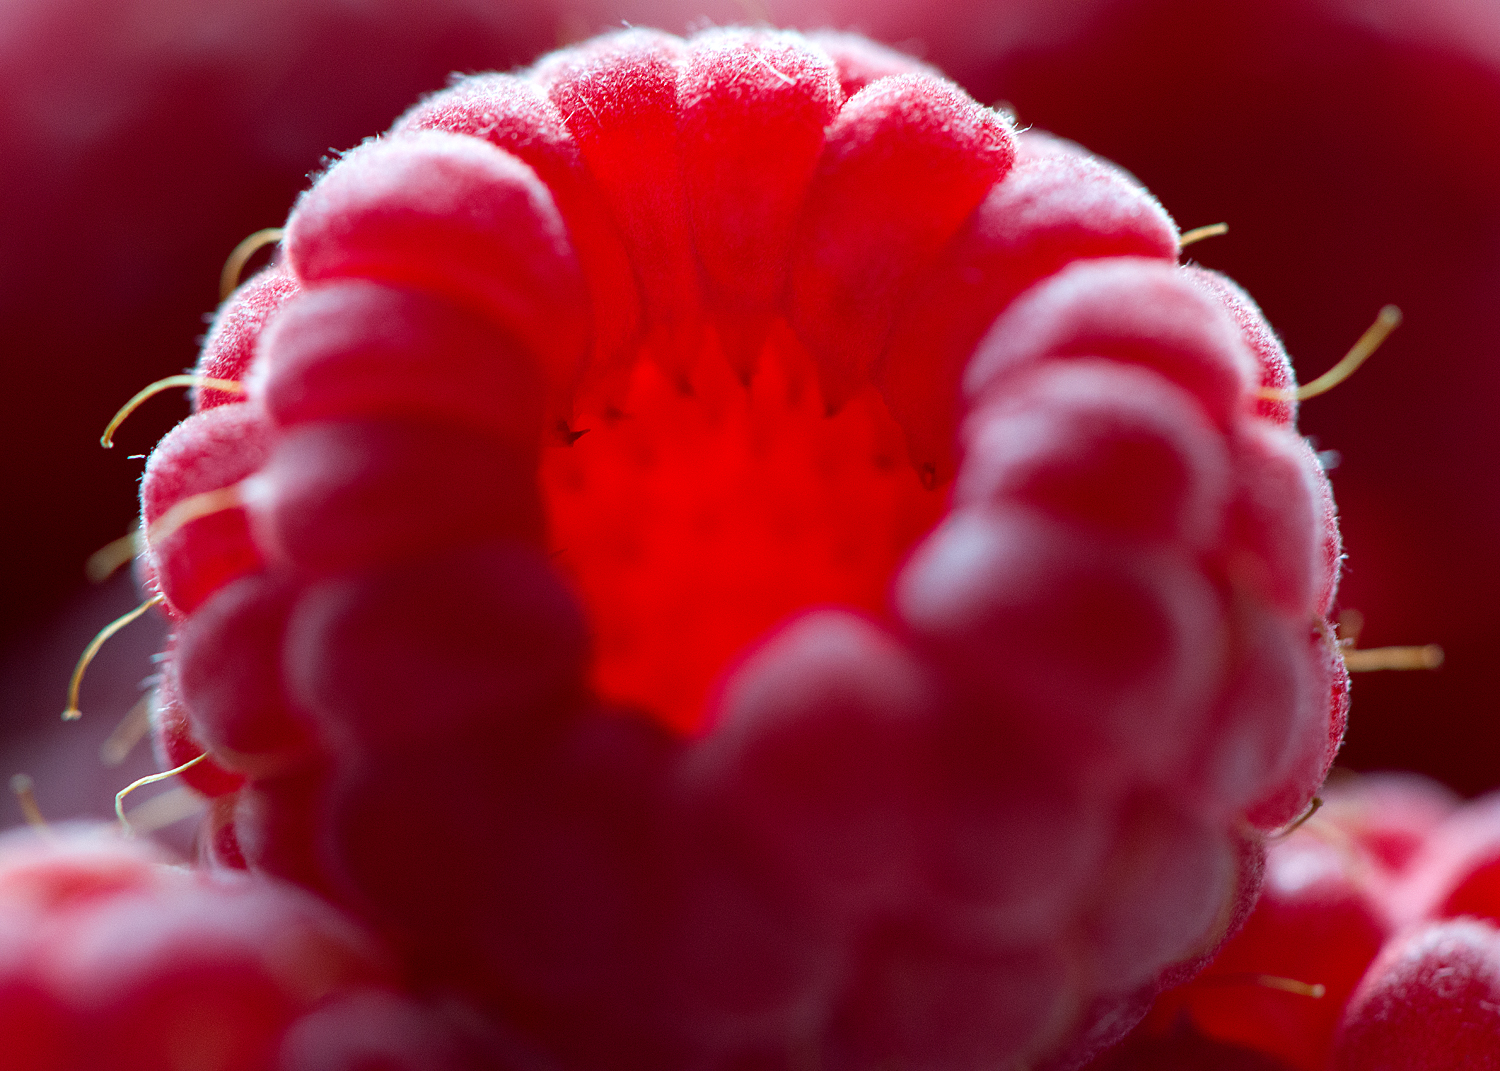 enter the mind of a raspberry